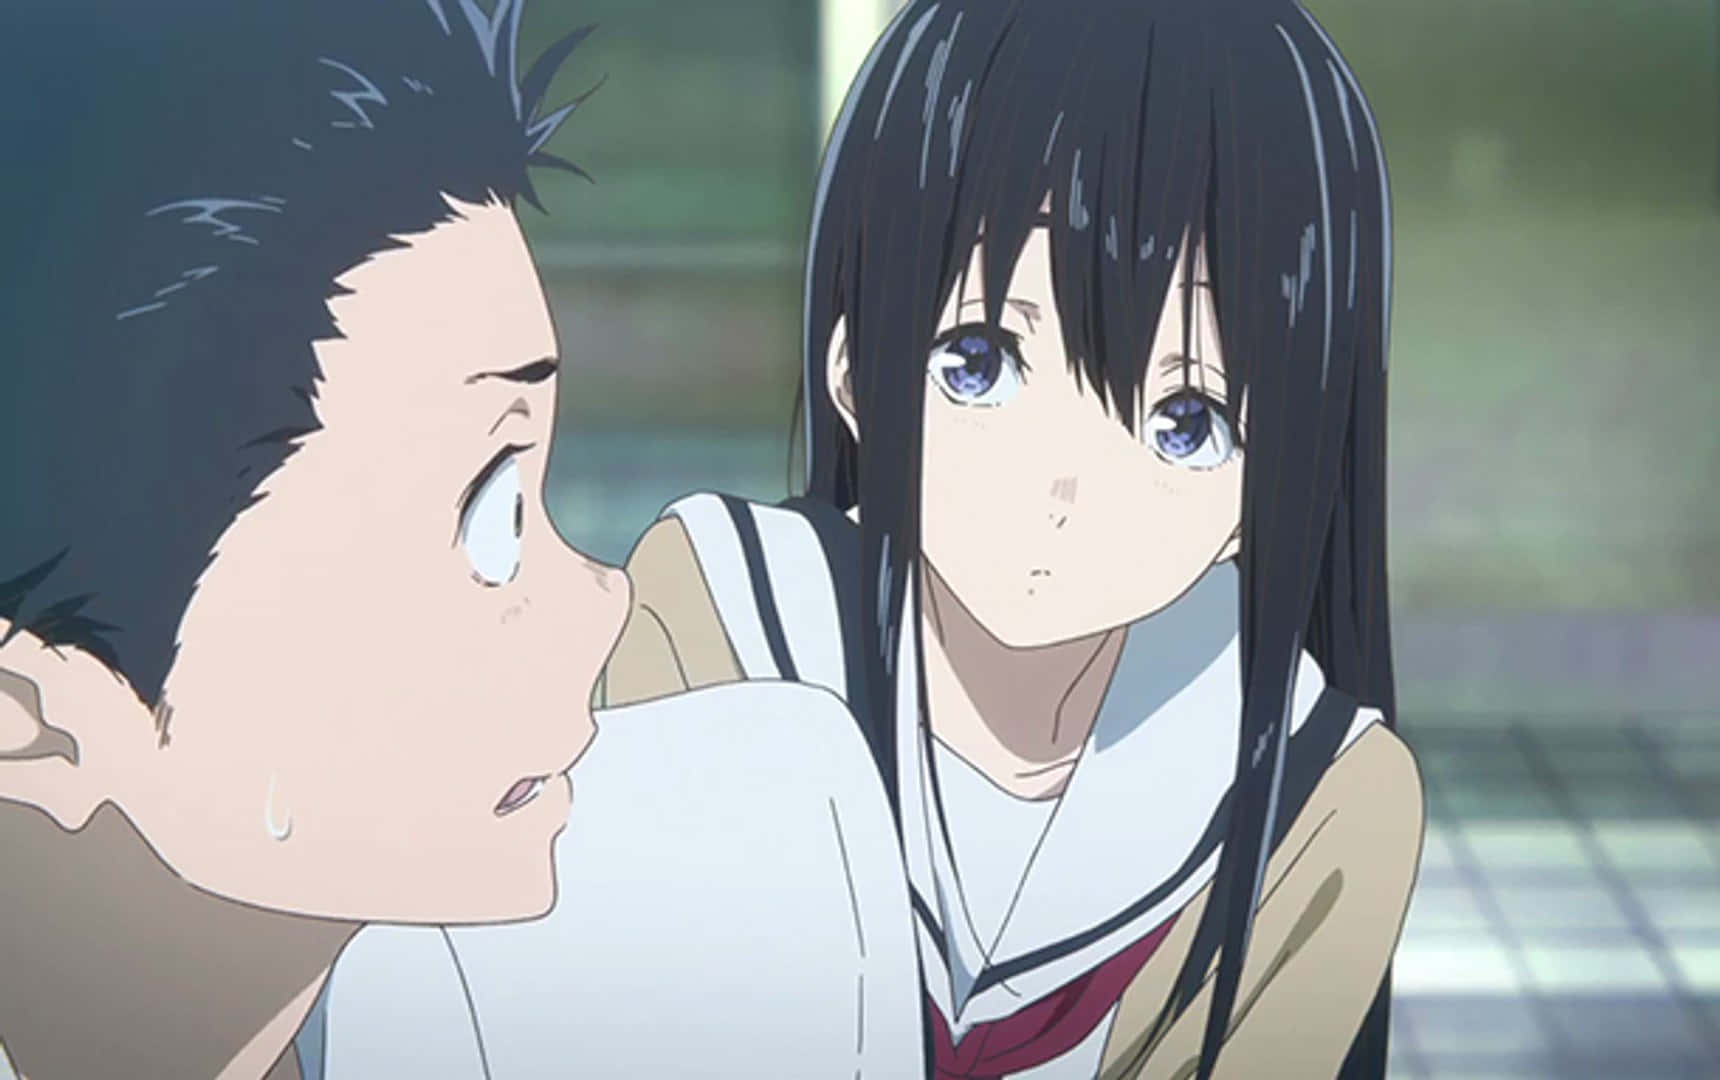 An intense dramatic moment from A Silent Voice